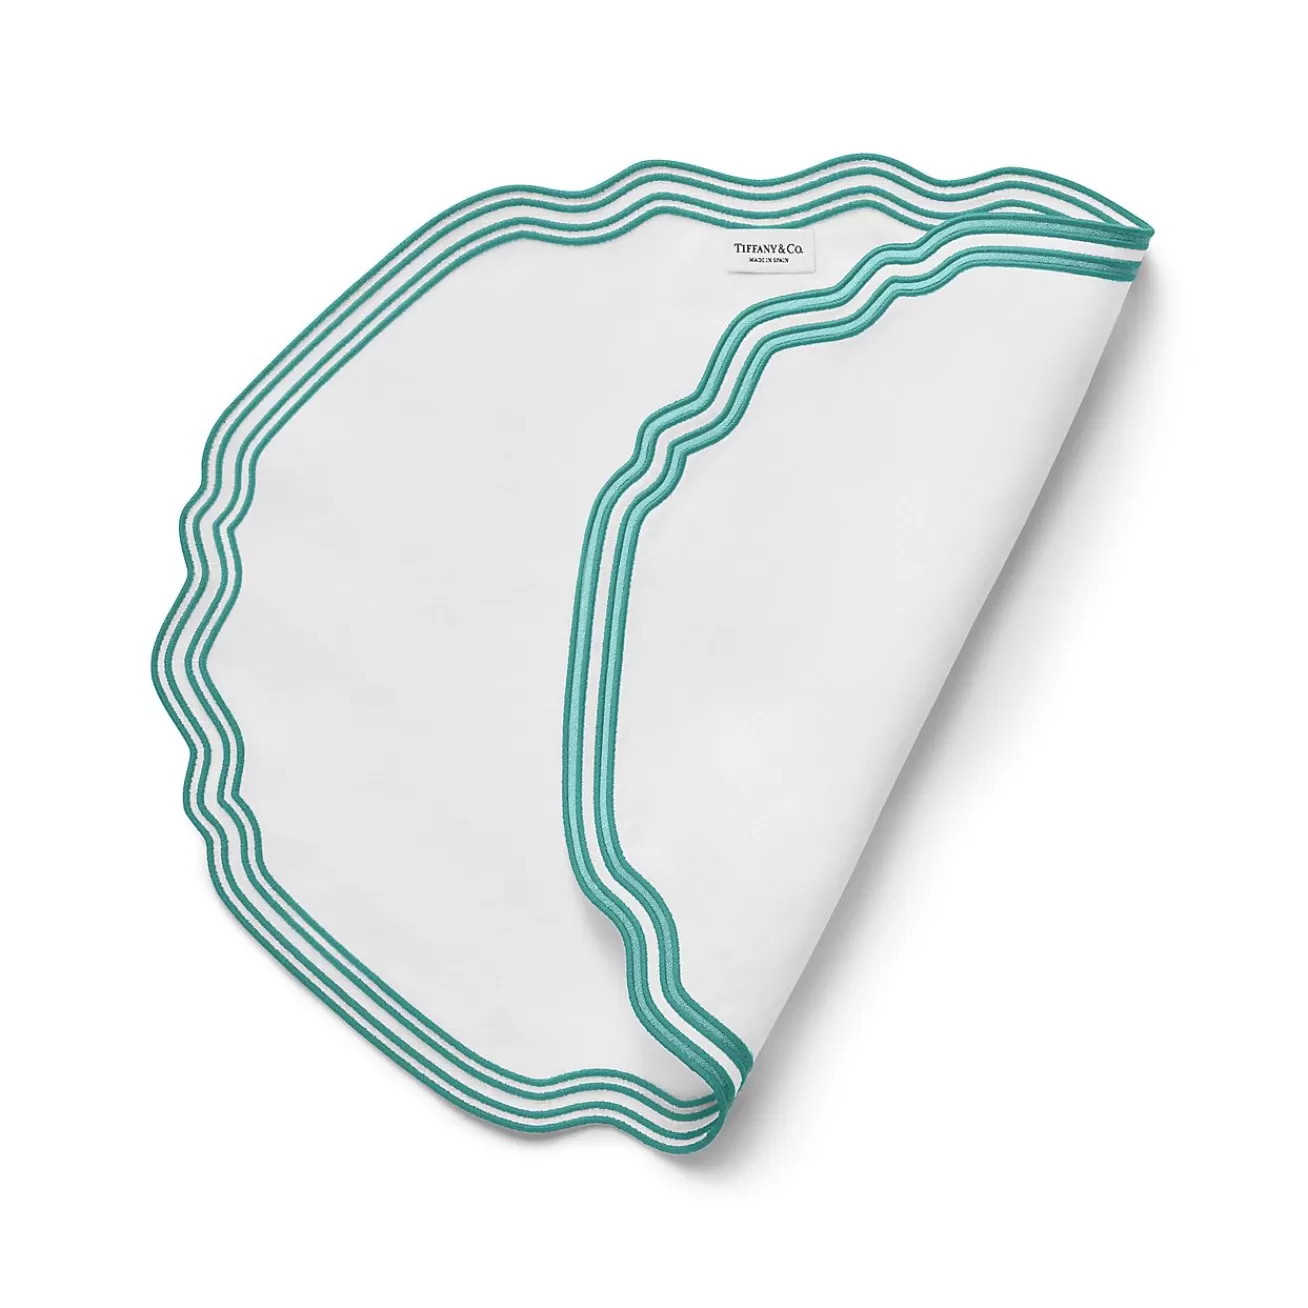 Tiffany & Co. Tiffany Home Essentials Wave Placemats in Linen, Set of Four | ^ Decor | Table Linens